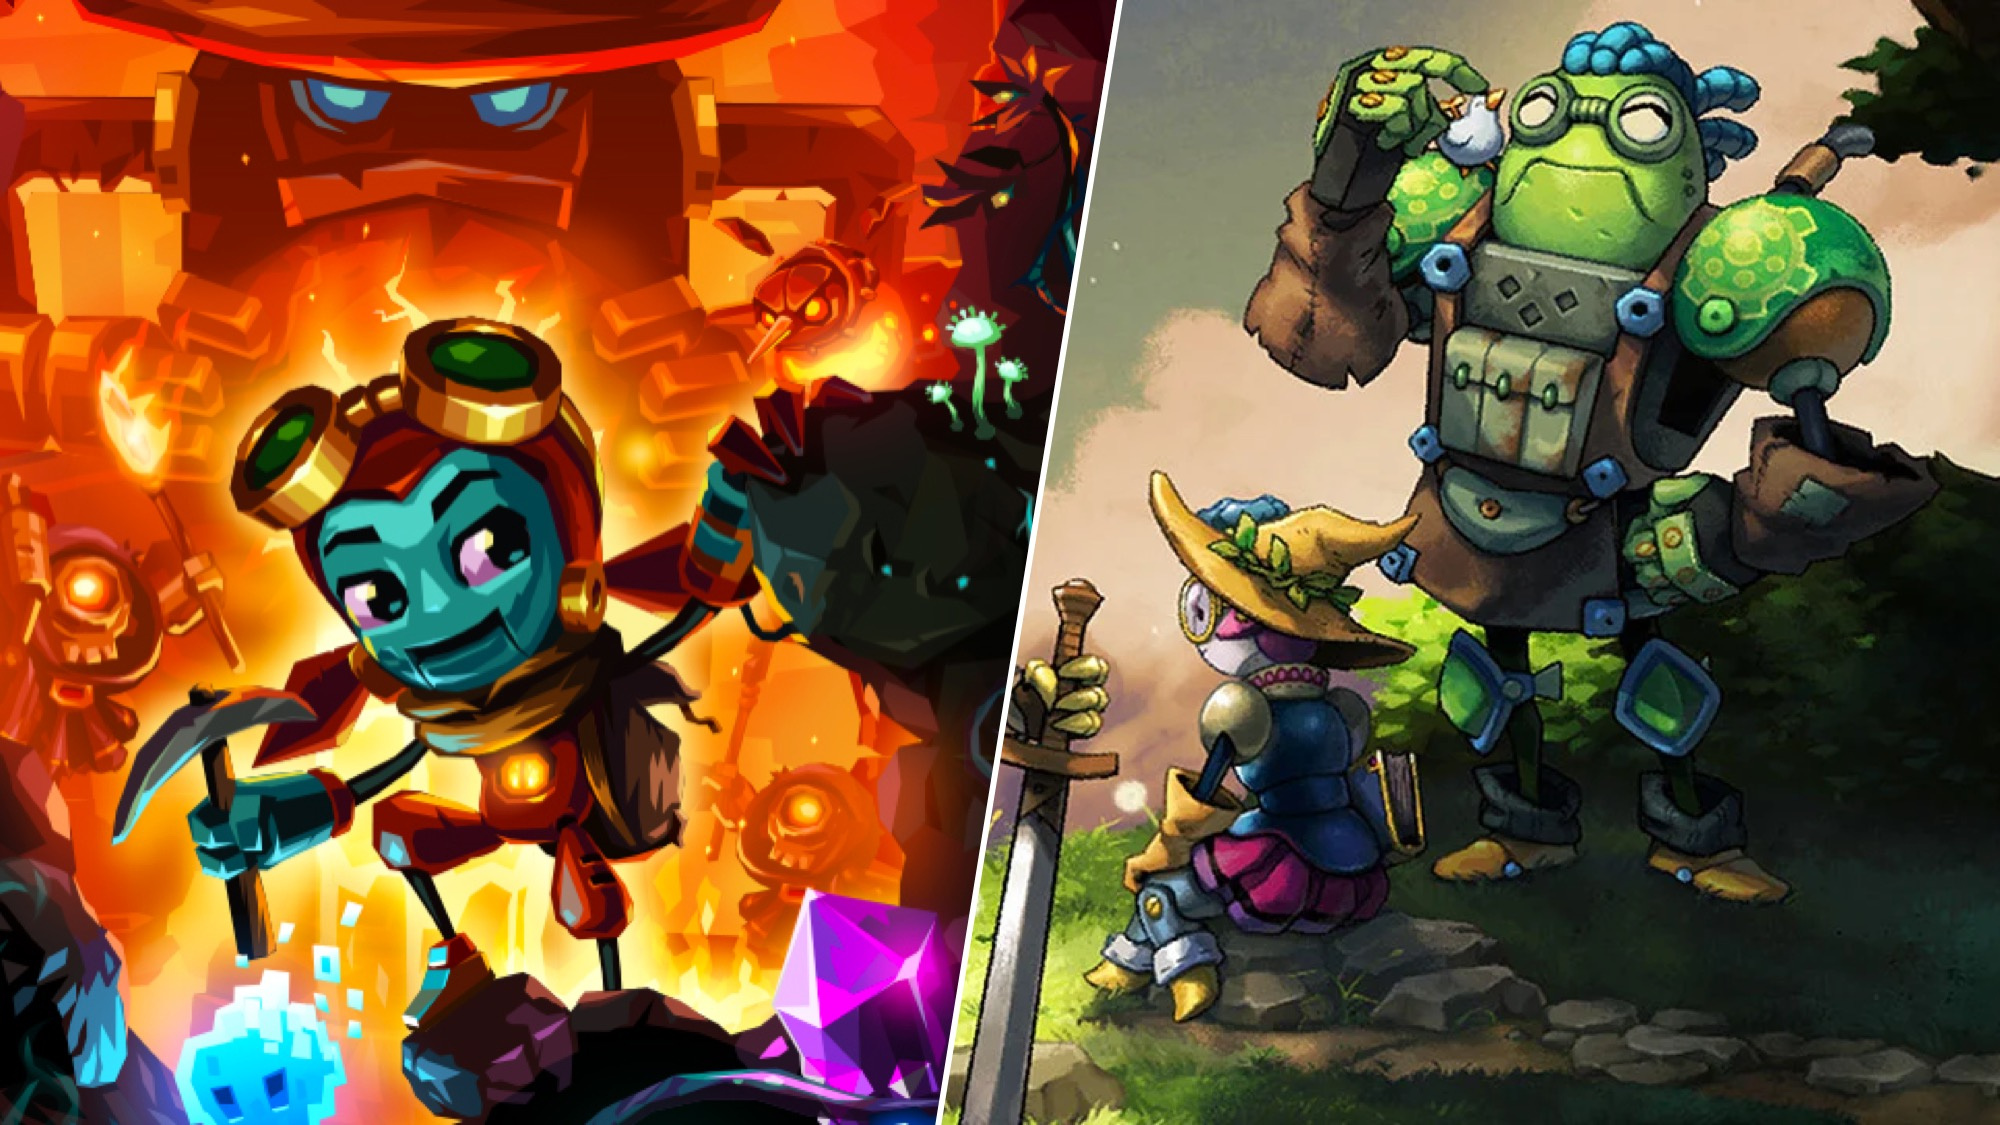 Image Form Gives Away 2 000 Steamworld Games Codes Now Sent Out